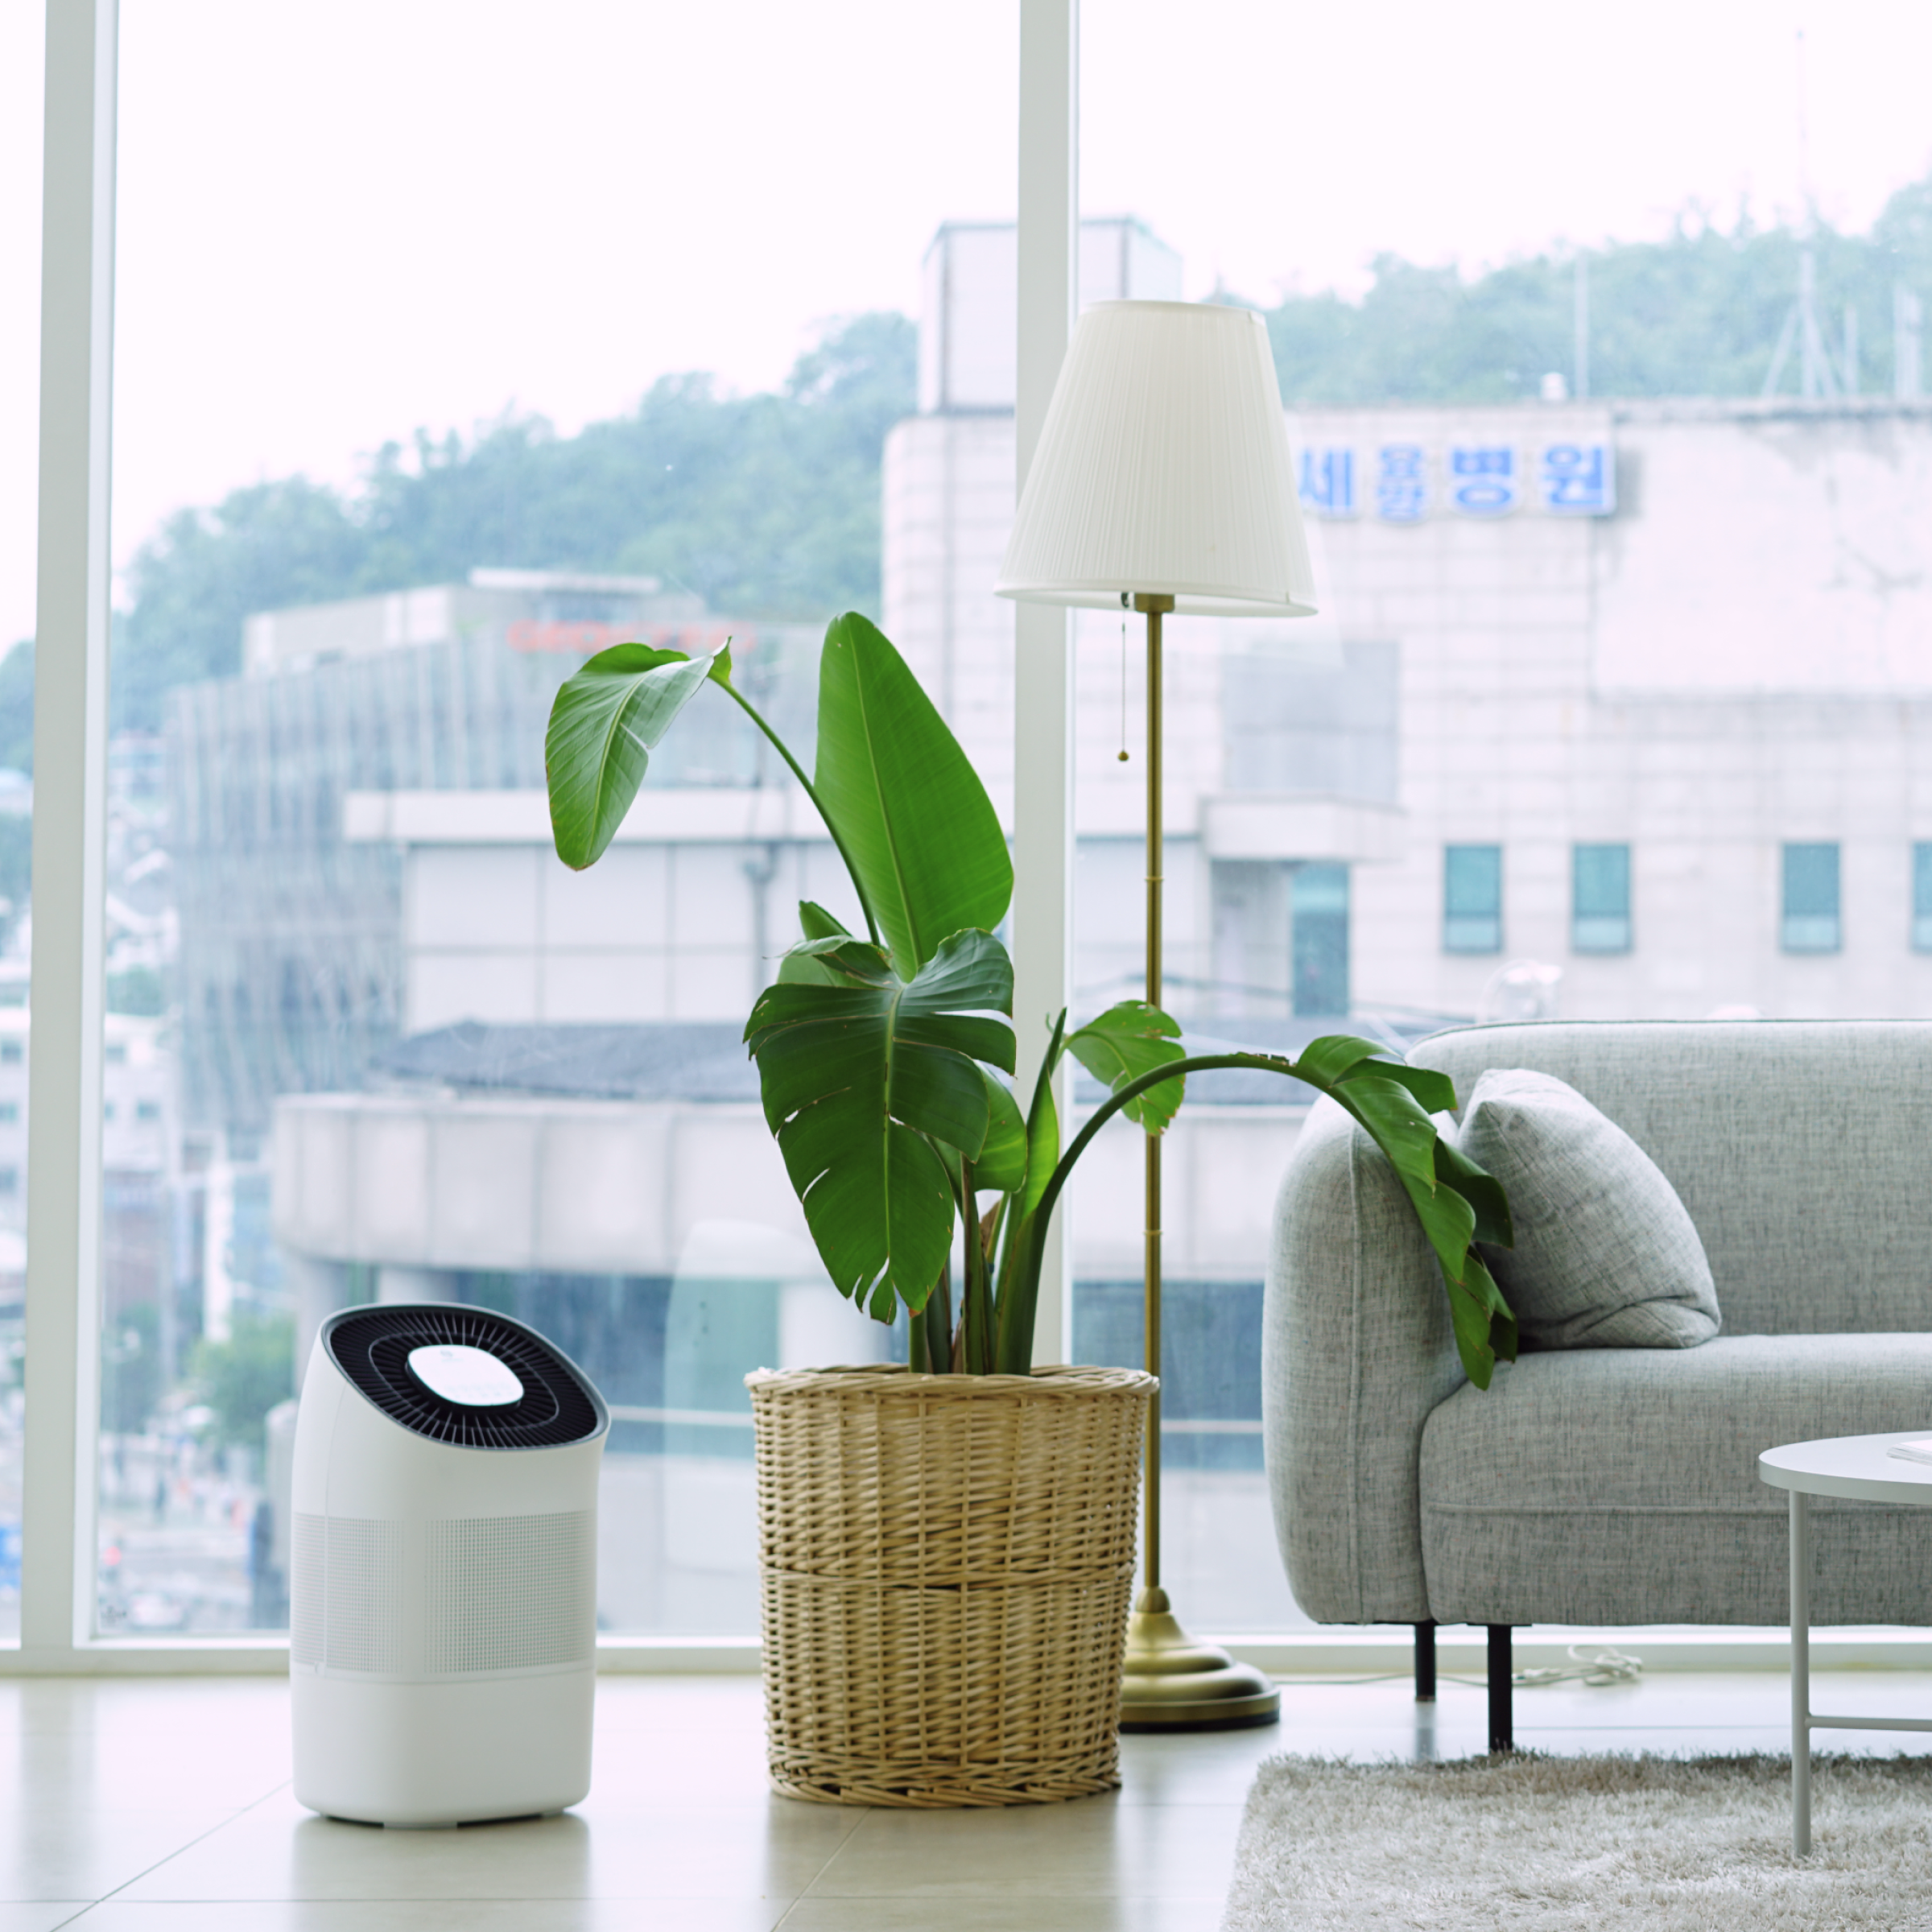 Zenwell Super Air Purifier + Humidifier Smart in urban apartment living room